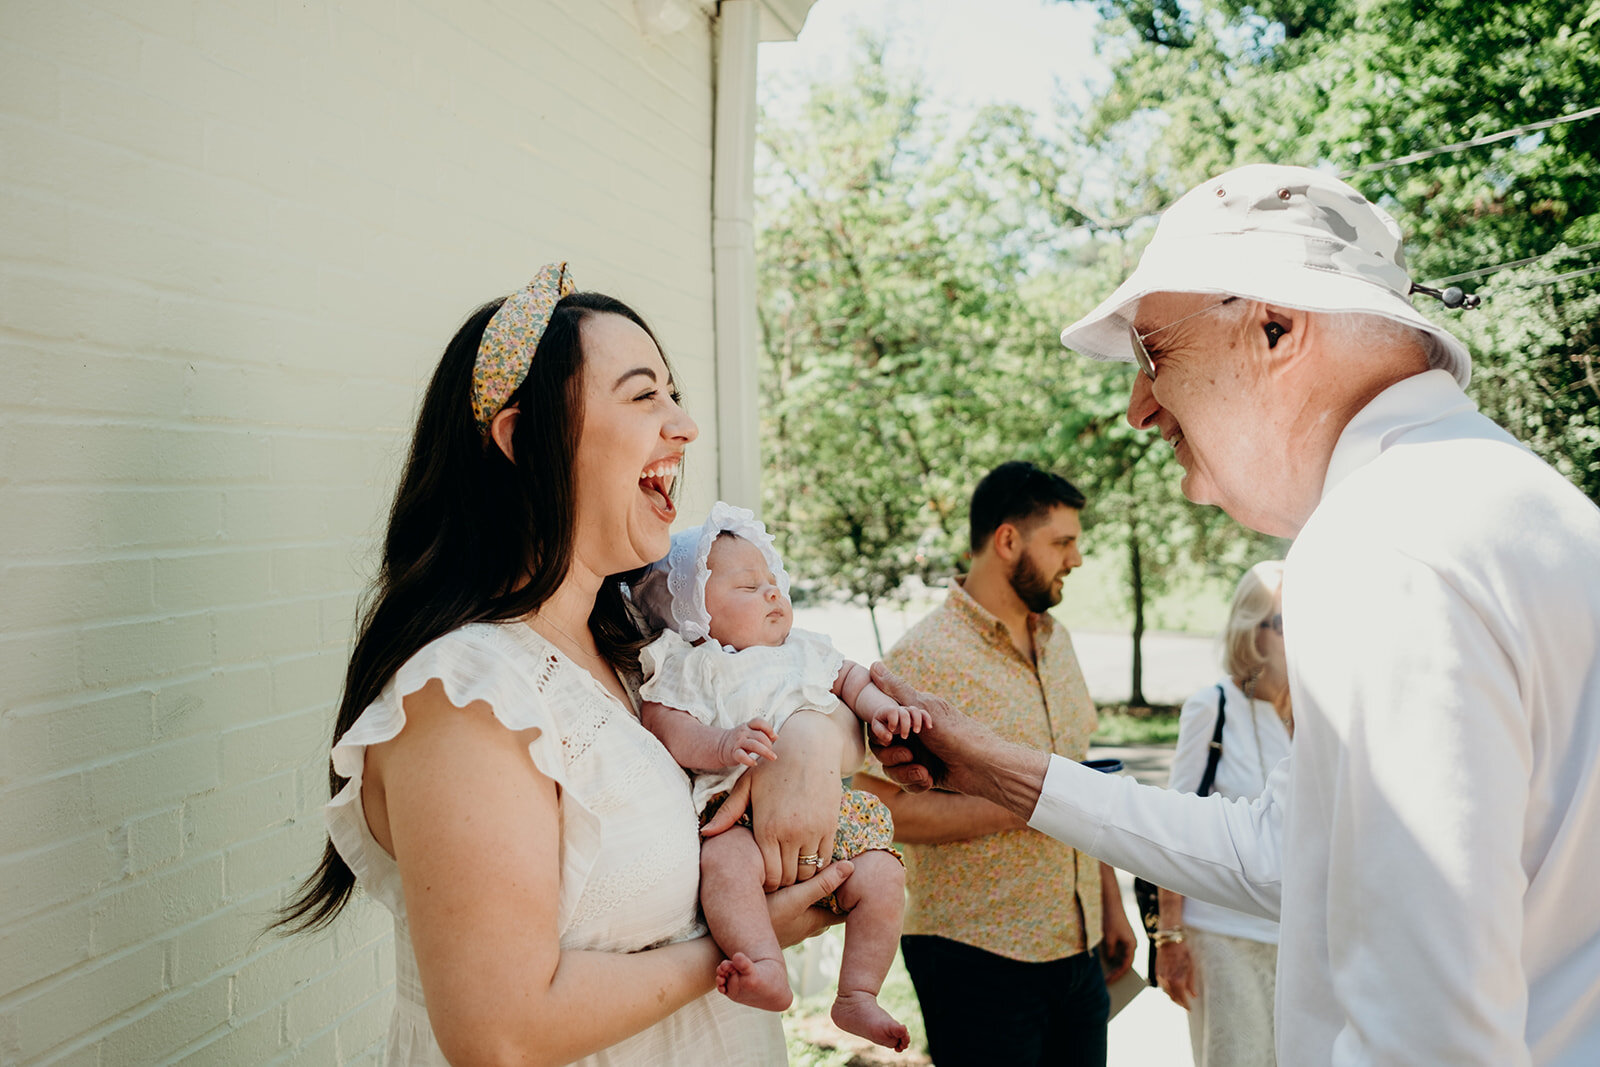 A man greets his granddaughter and great granddaughter before a Jewish baby naming ceremony.